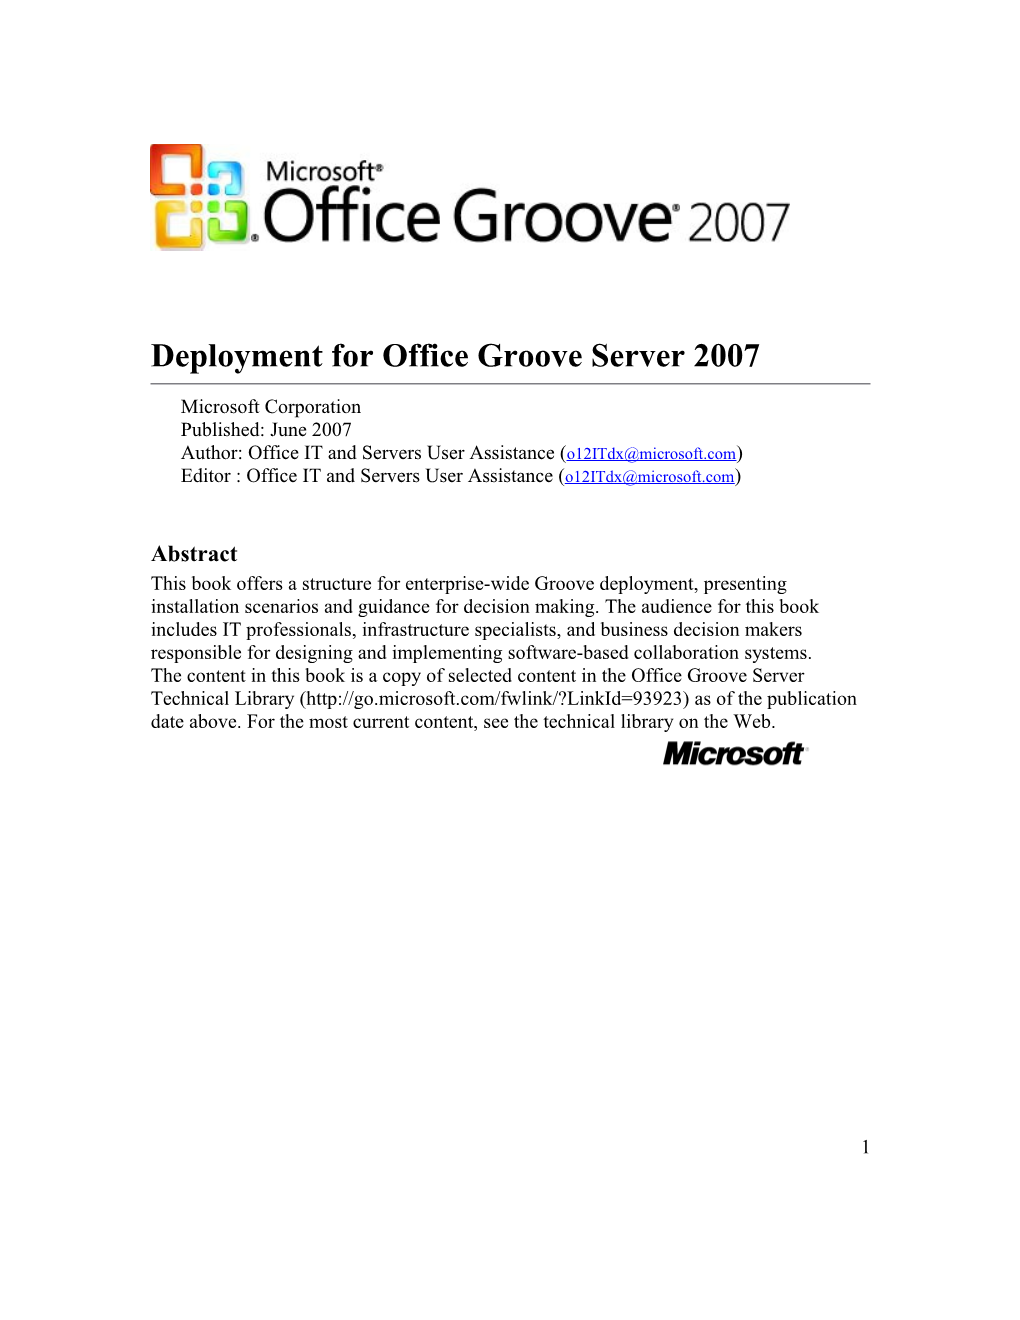 Deployment for Office Groove Server 2007